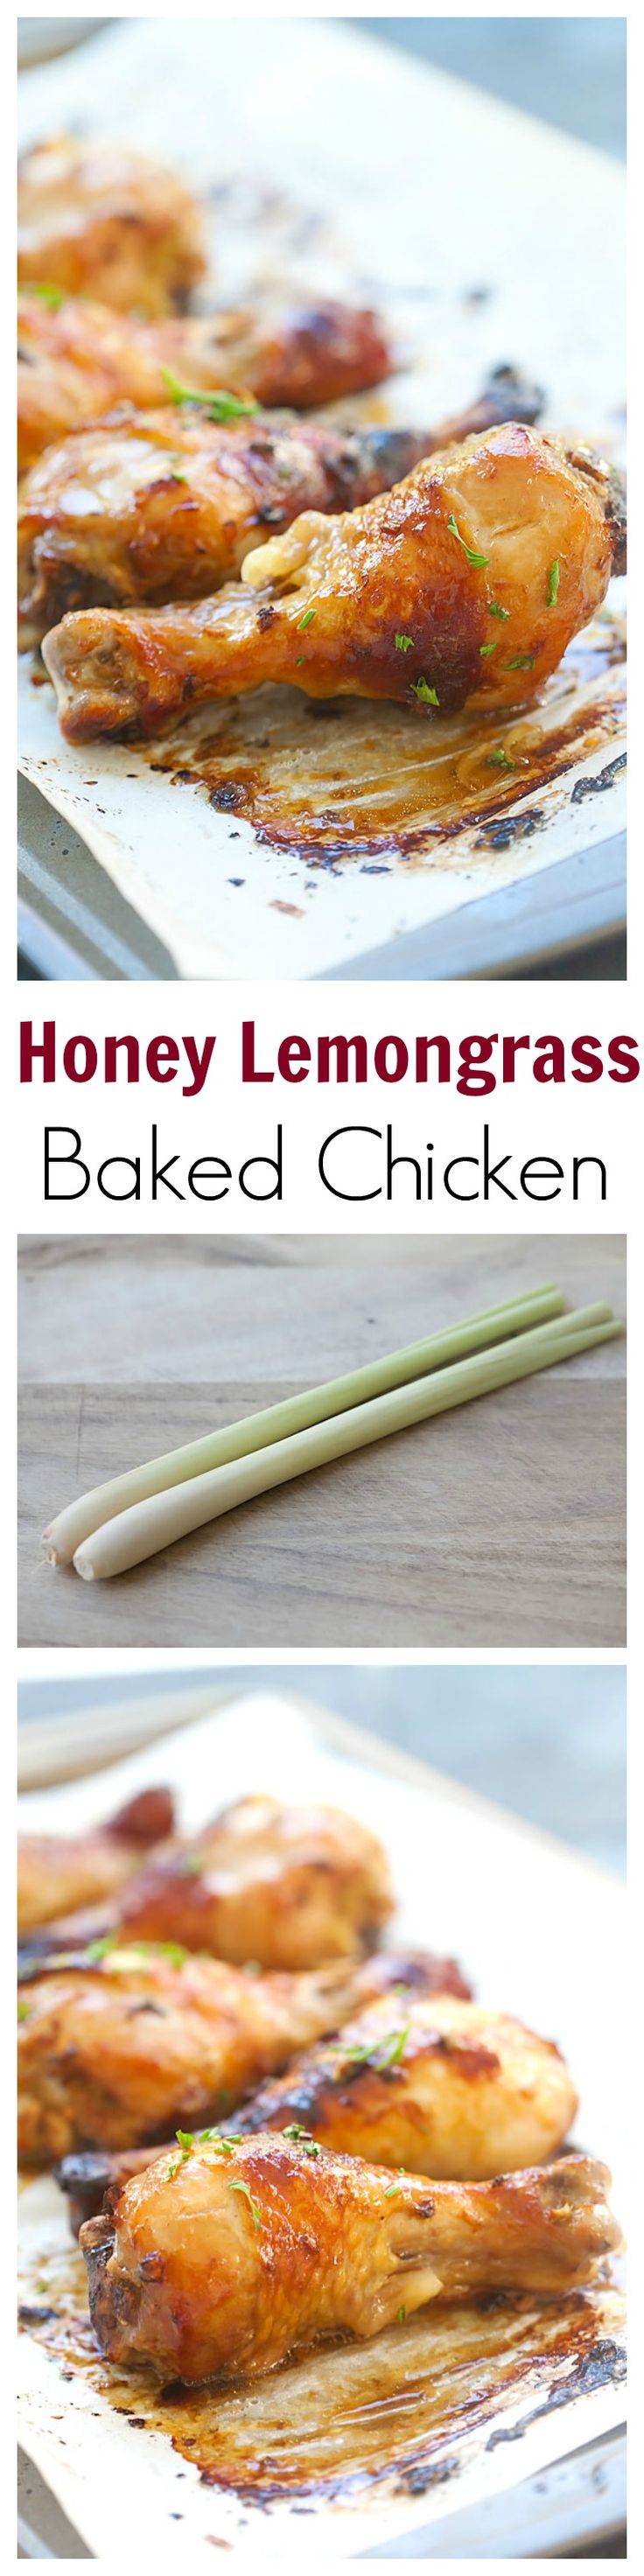 Honey Lemongrass Baked Chicken – honey & lemongrass marinated chicken baked to golden perfection. So easy and yummy for the entire family | rasamalaysia.com